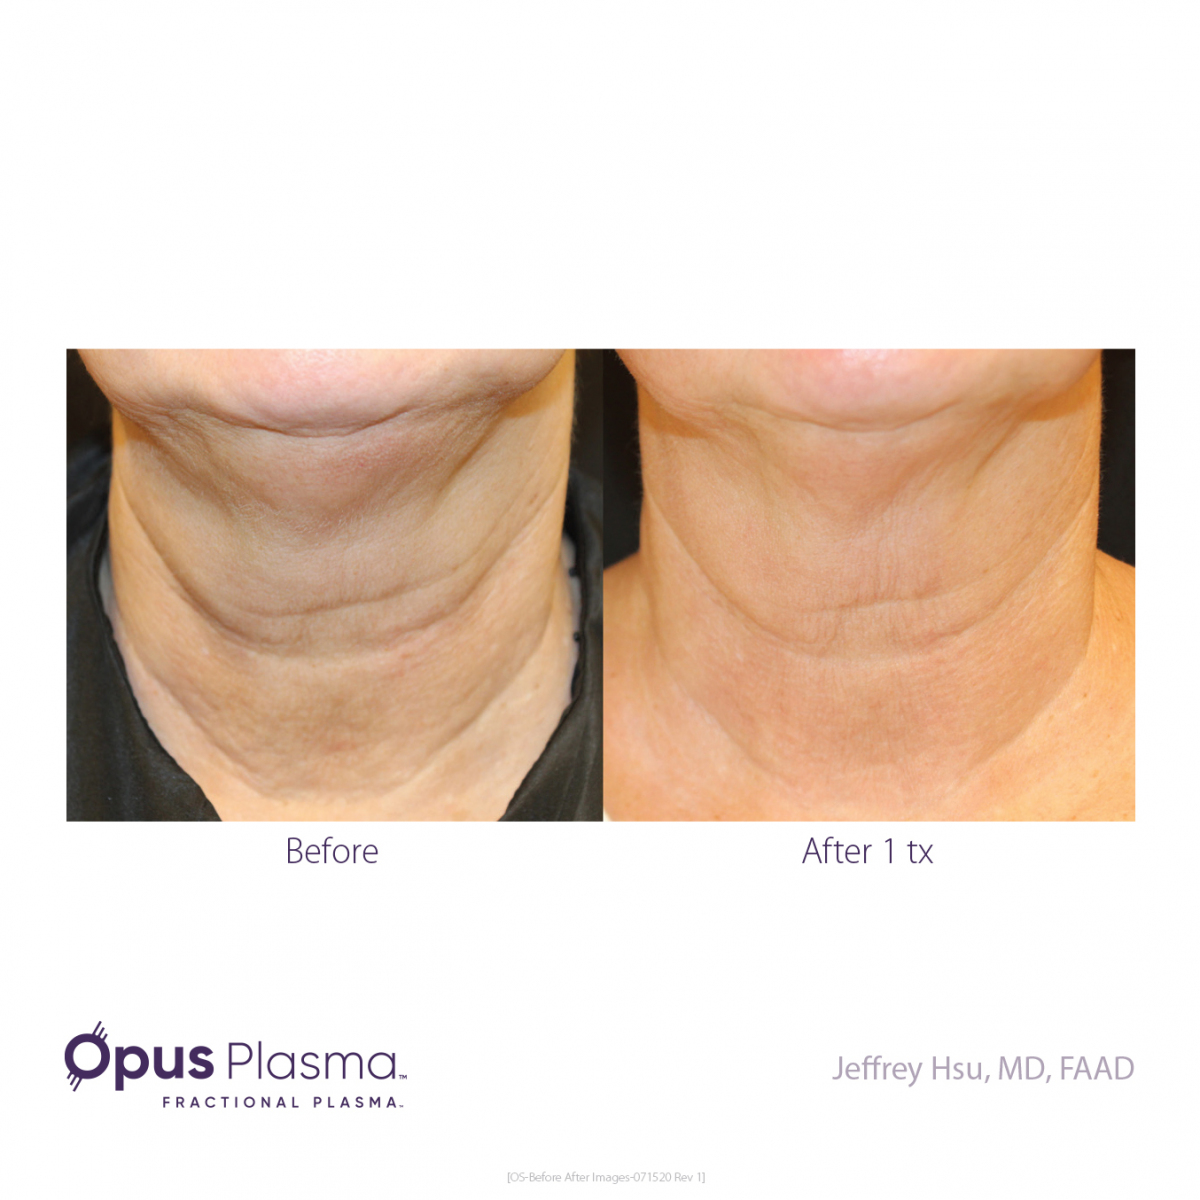 Before and After Opus Plasma